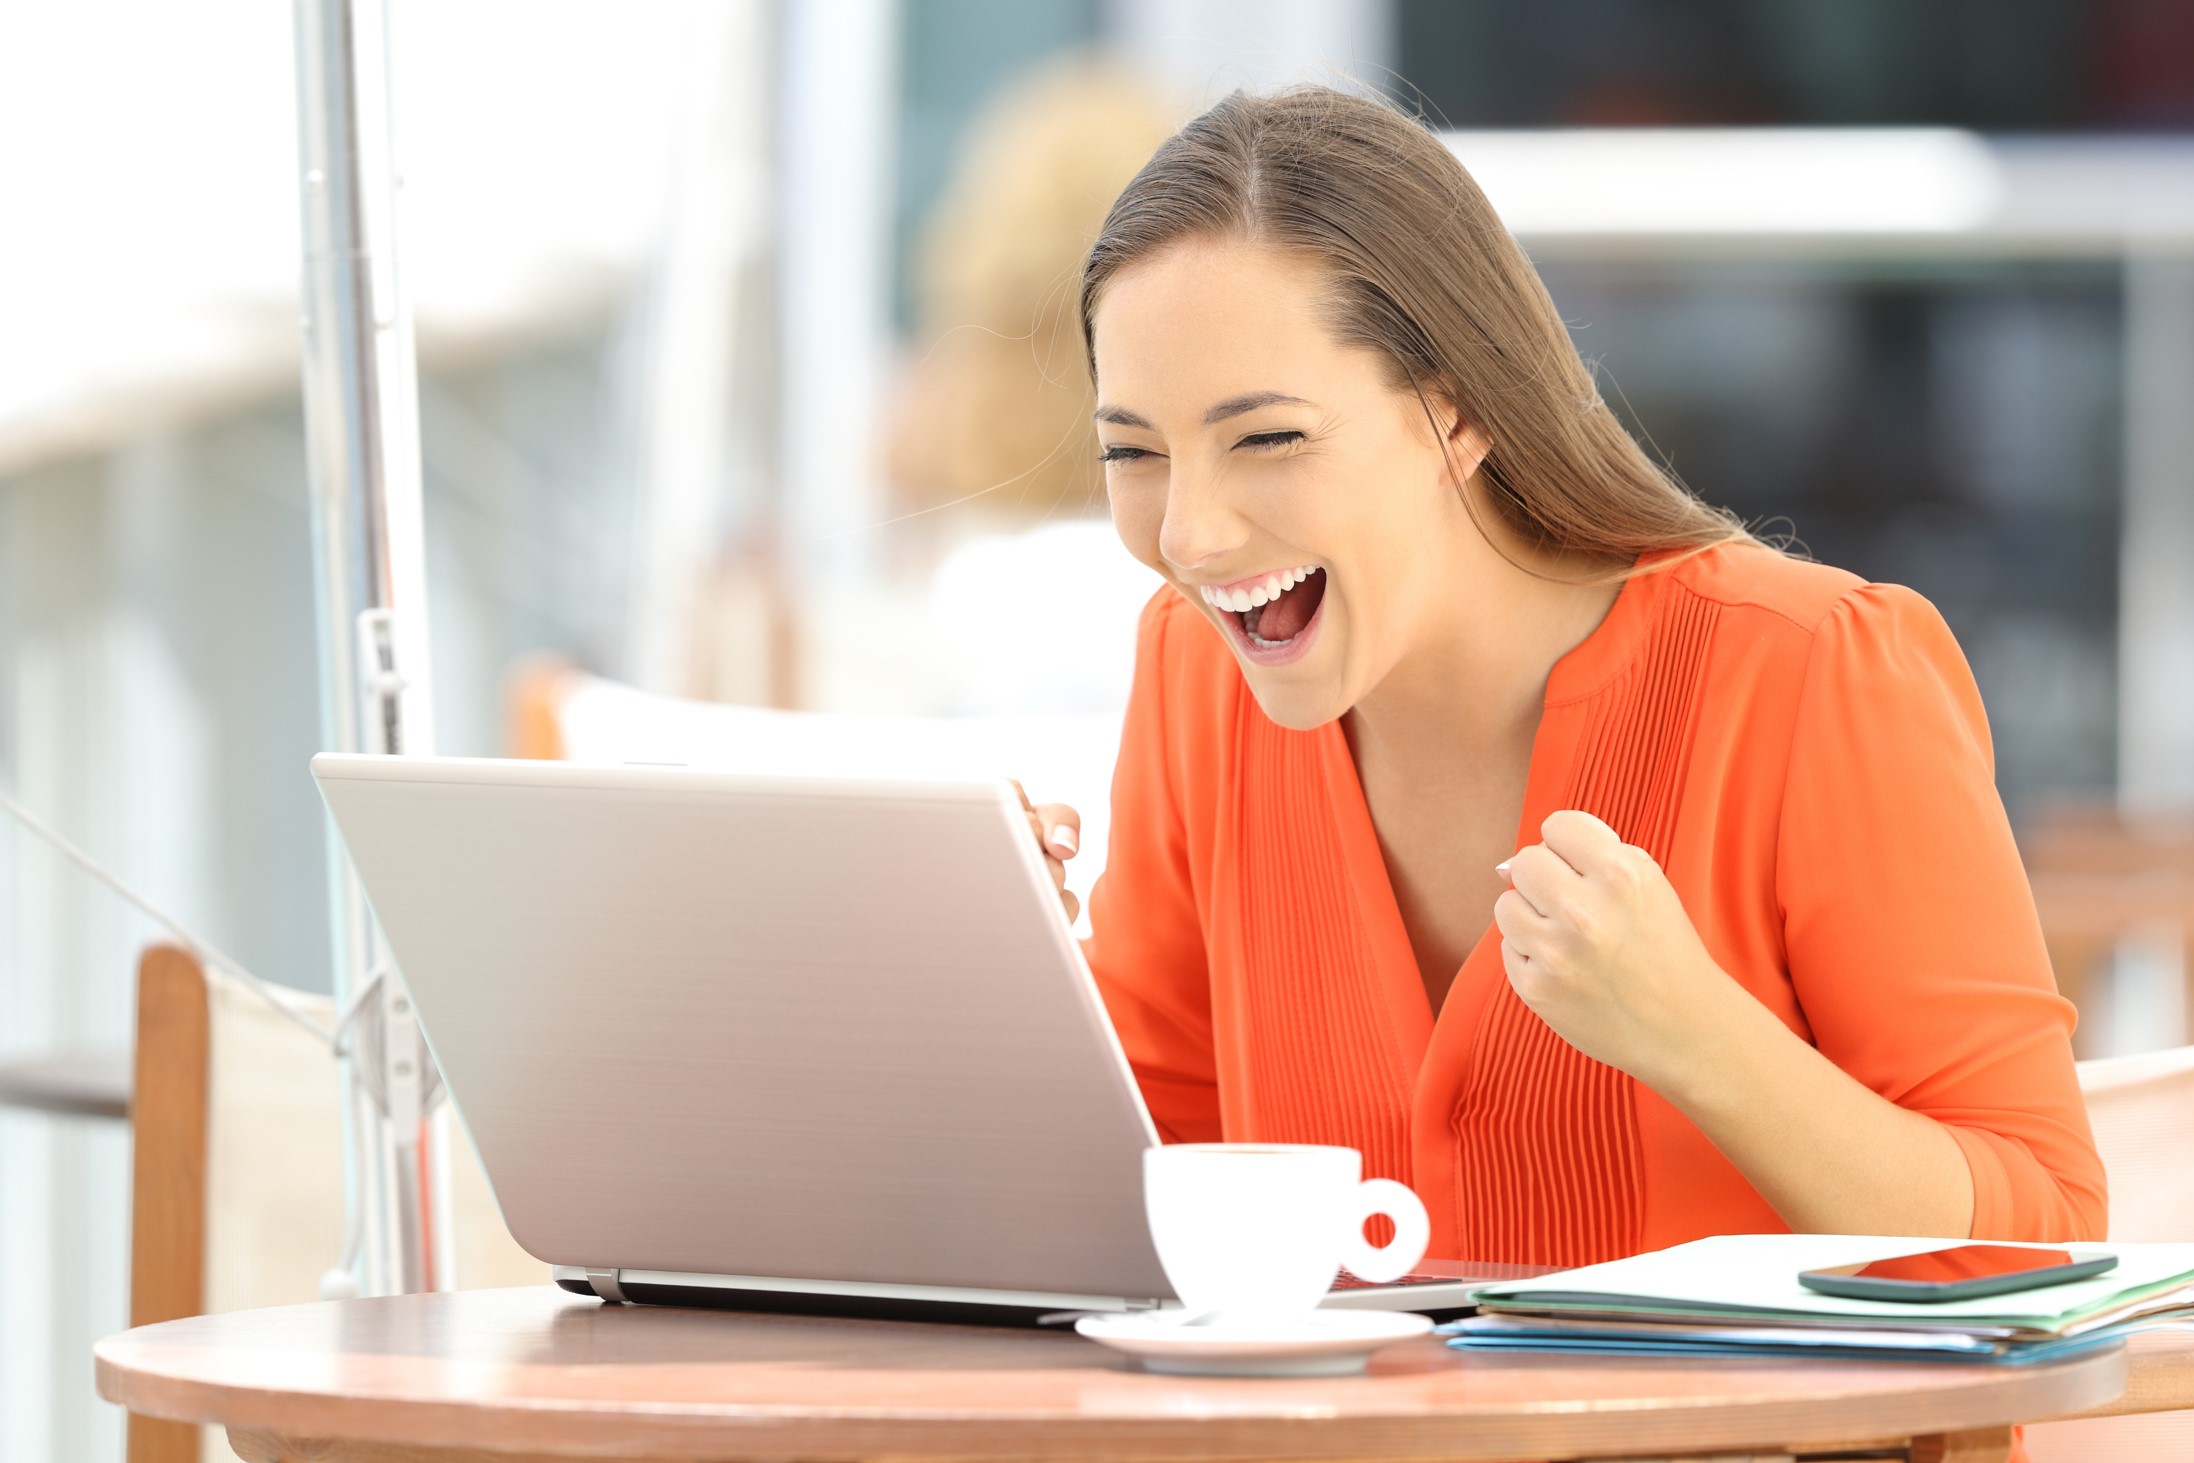 A Woman Laughing While Using A Computer